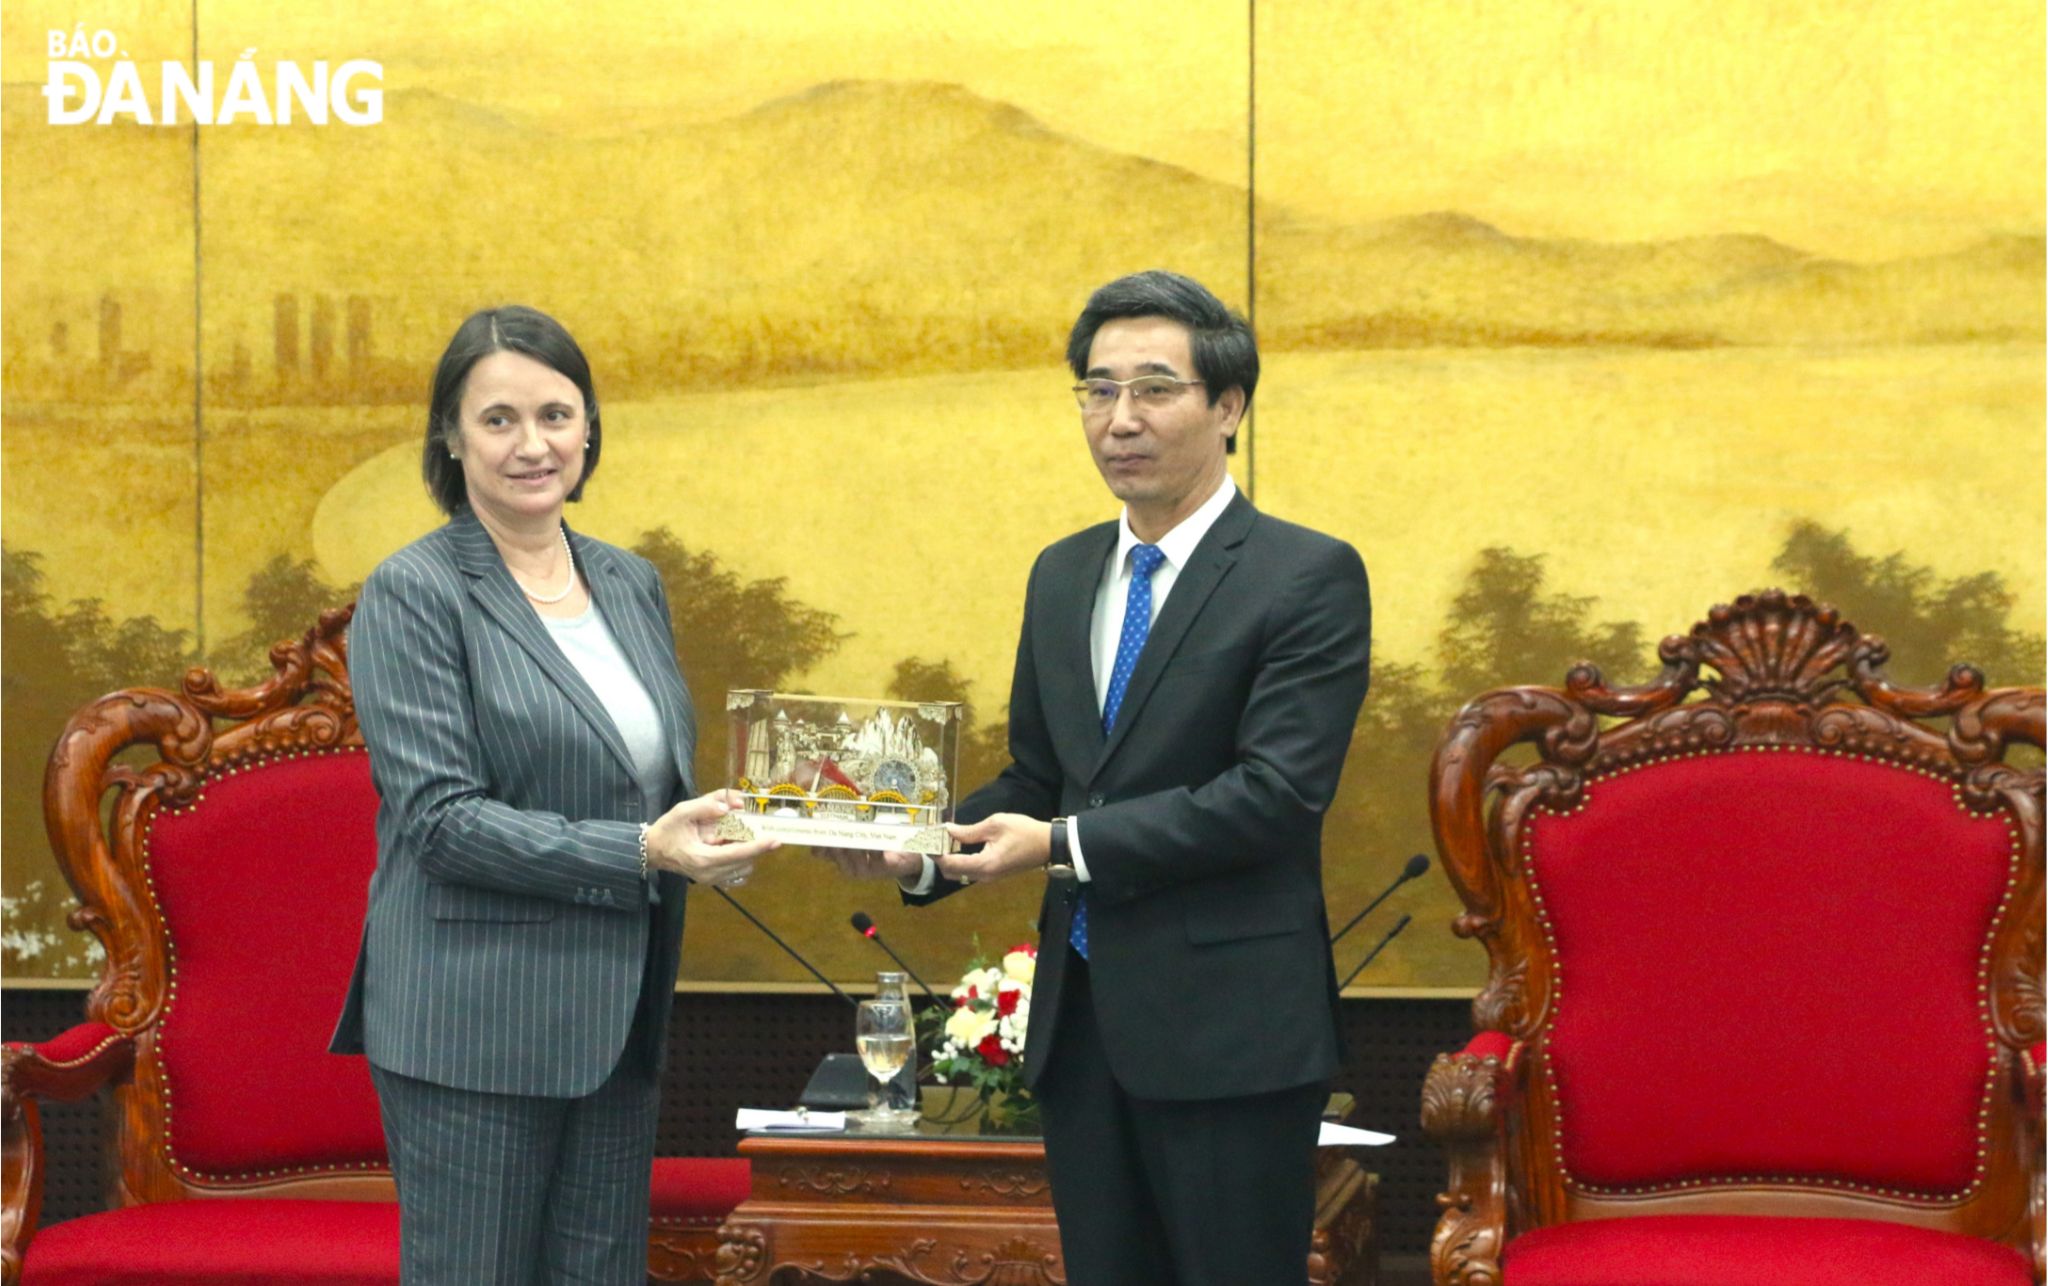 Vice Chairman of the Da Nang People's Committee Tran Chi Cuong (right) presents a souvenir to Mrs. Emmanuelle Pavillon-Grosser, Consul General of France in Ho Chi Minh City. Photo: T.PHUONG